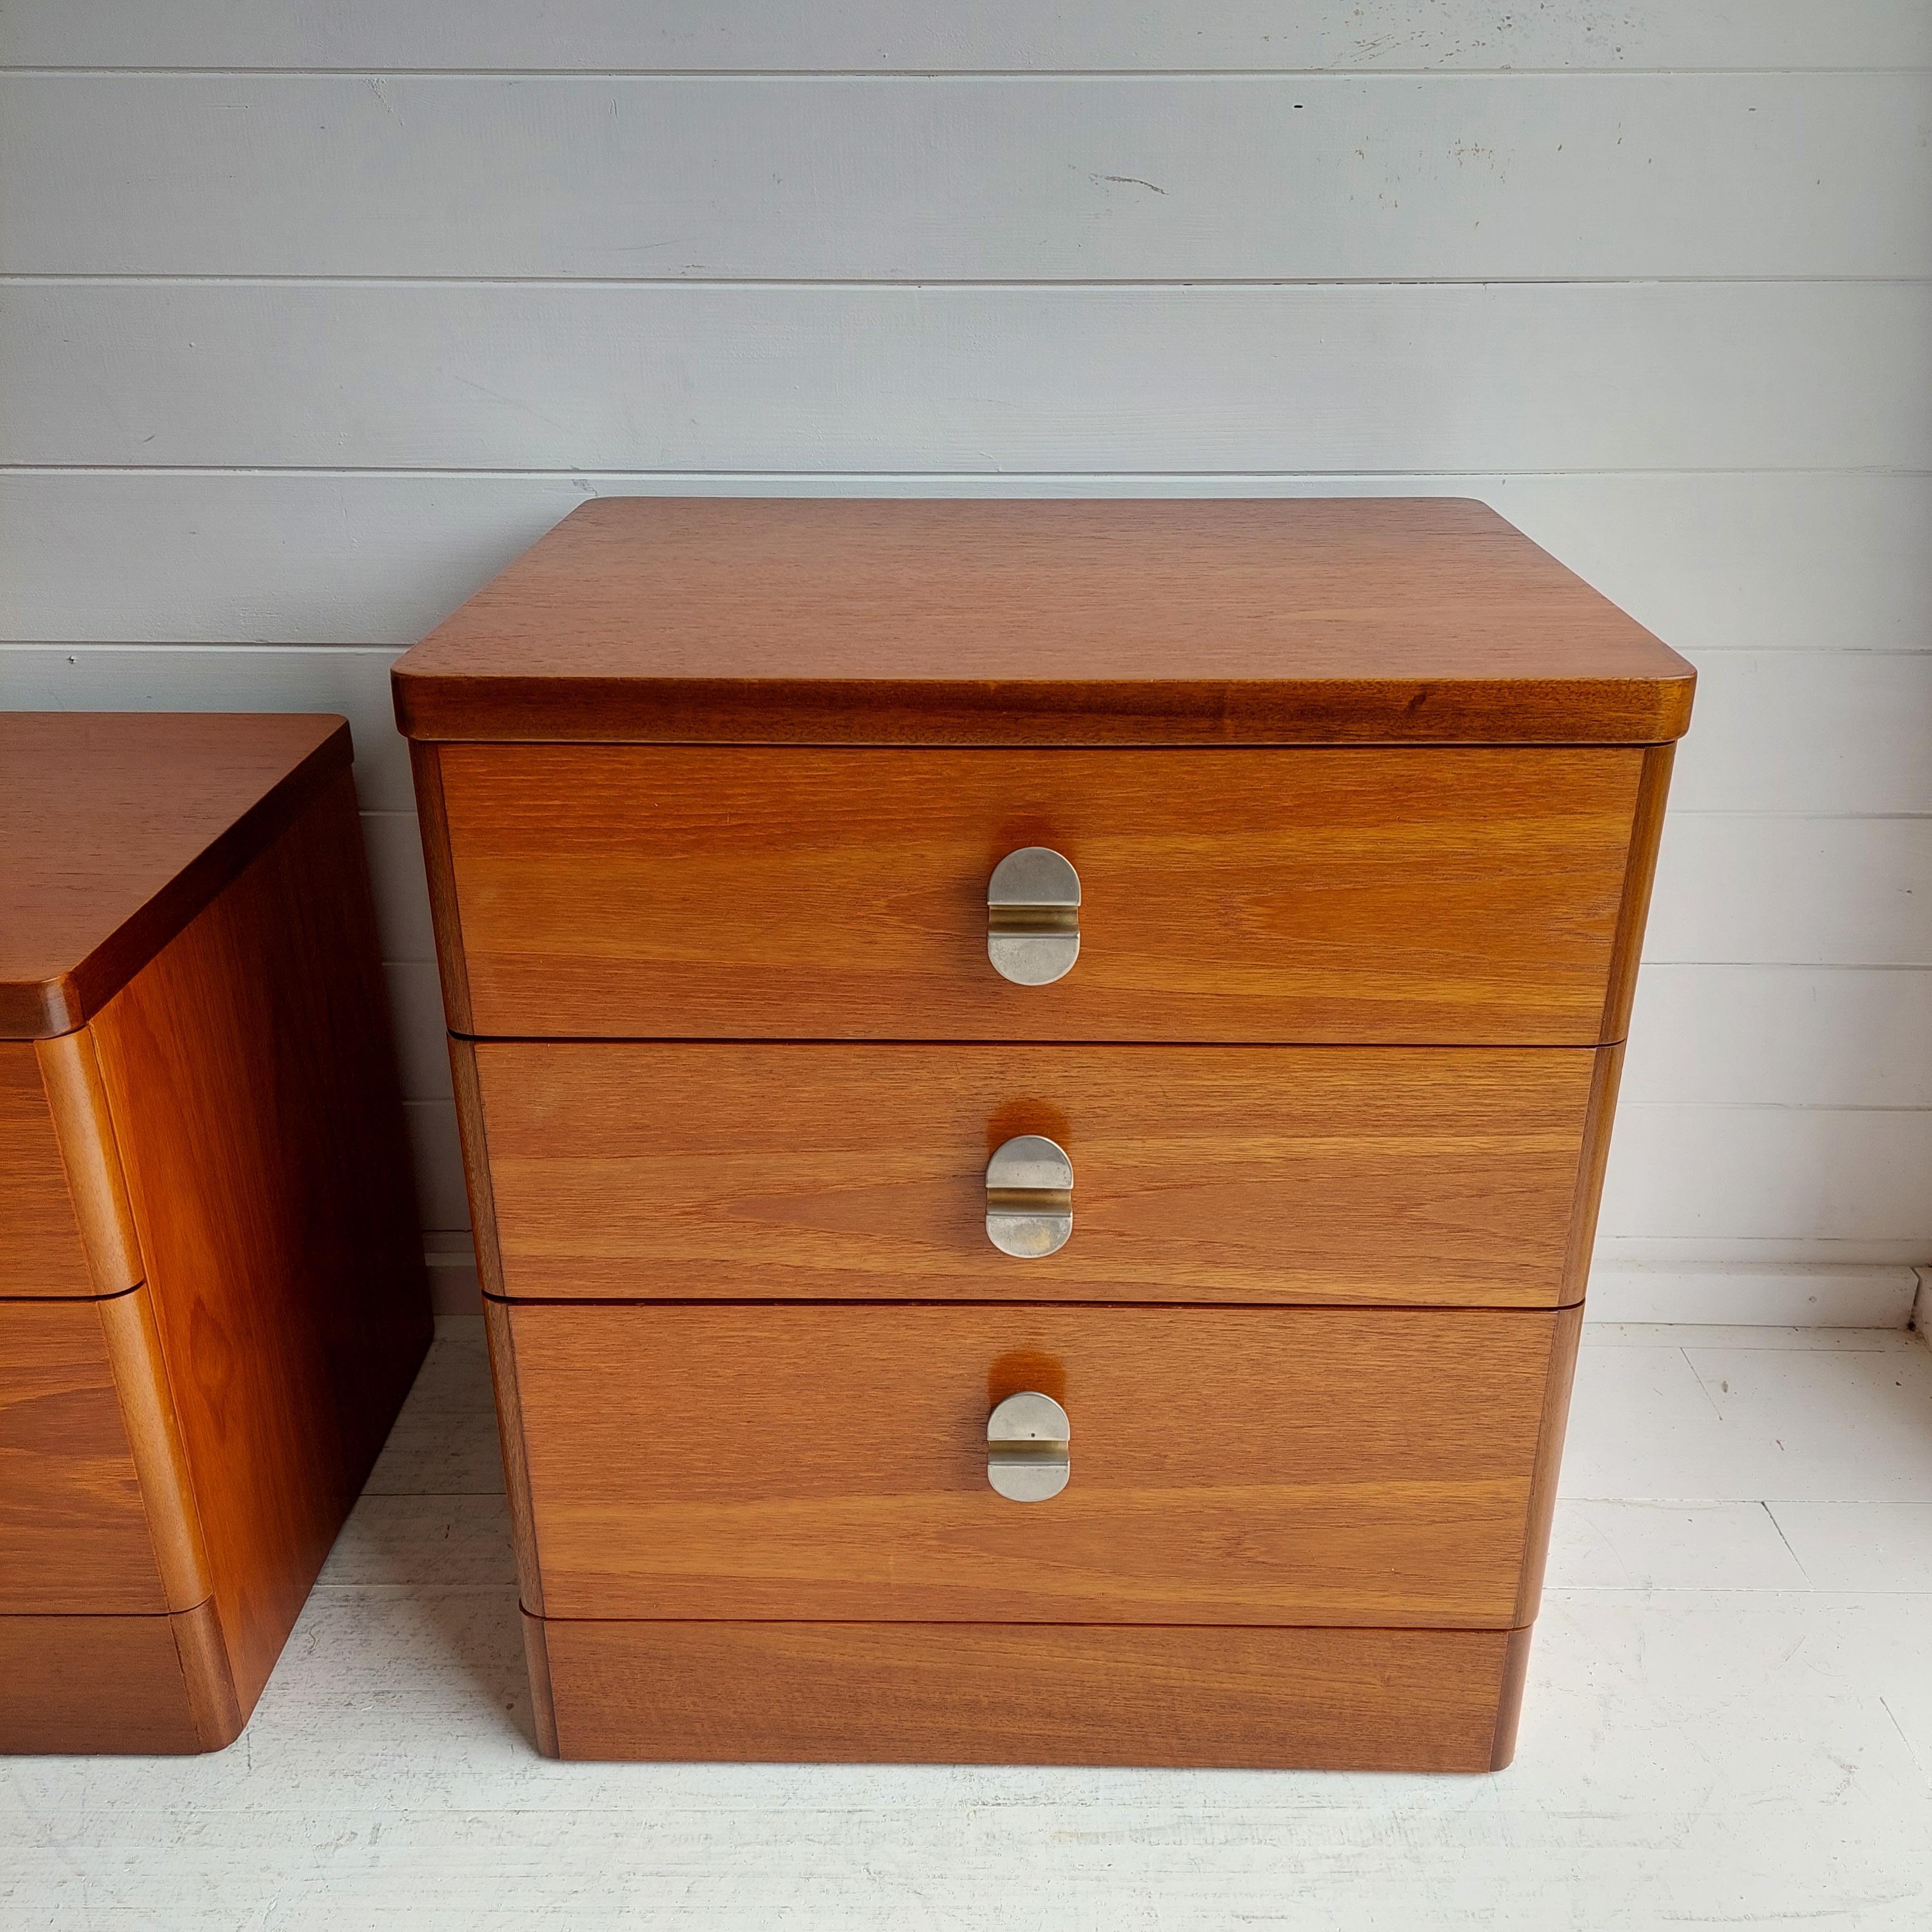 British Retro Midcentury Stag Cantata Teak Bedside Tables Drawers Nightstands, 70s